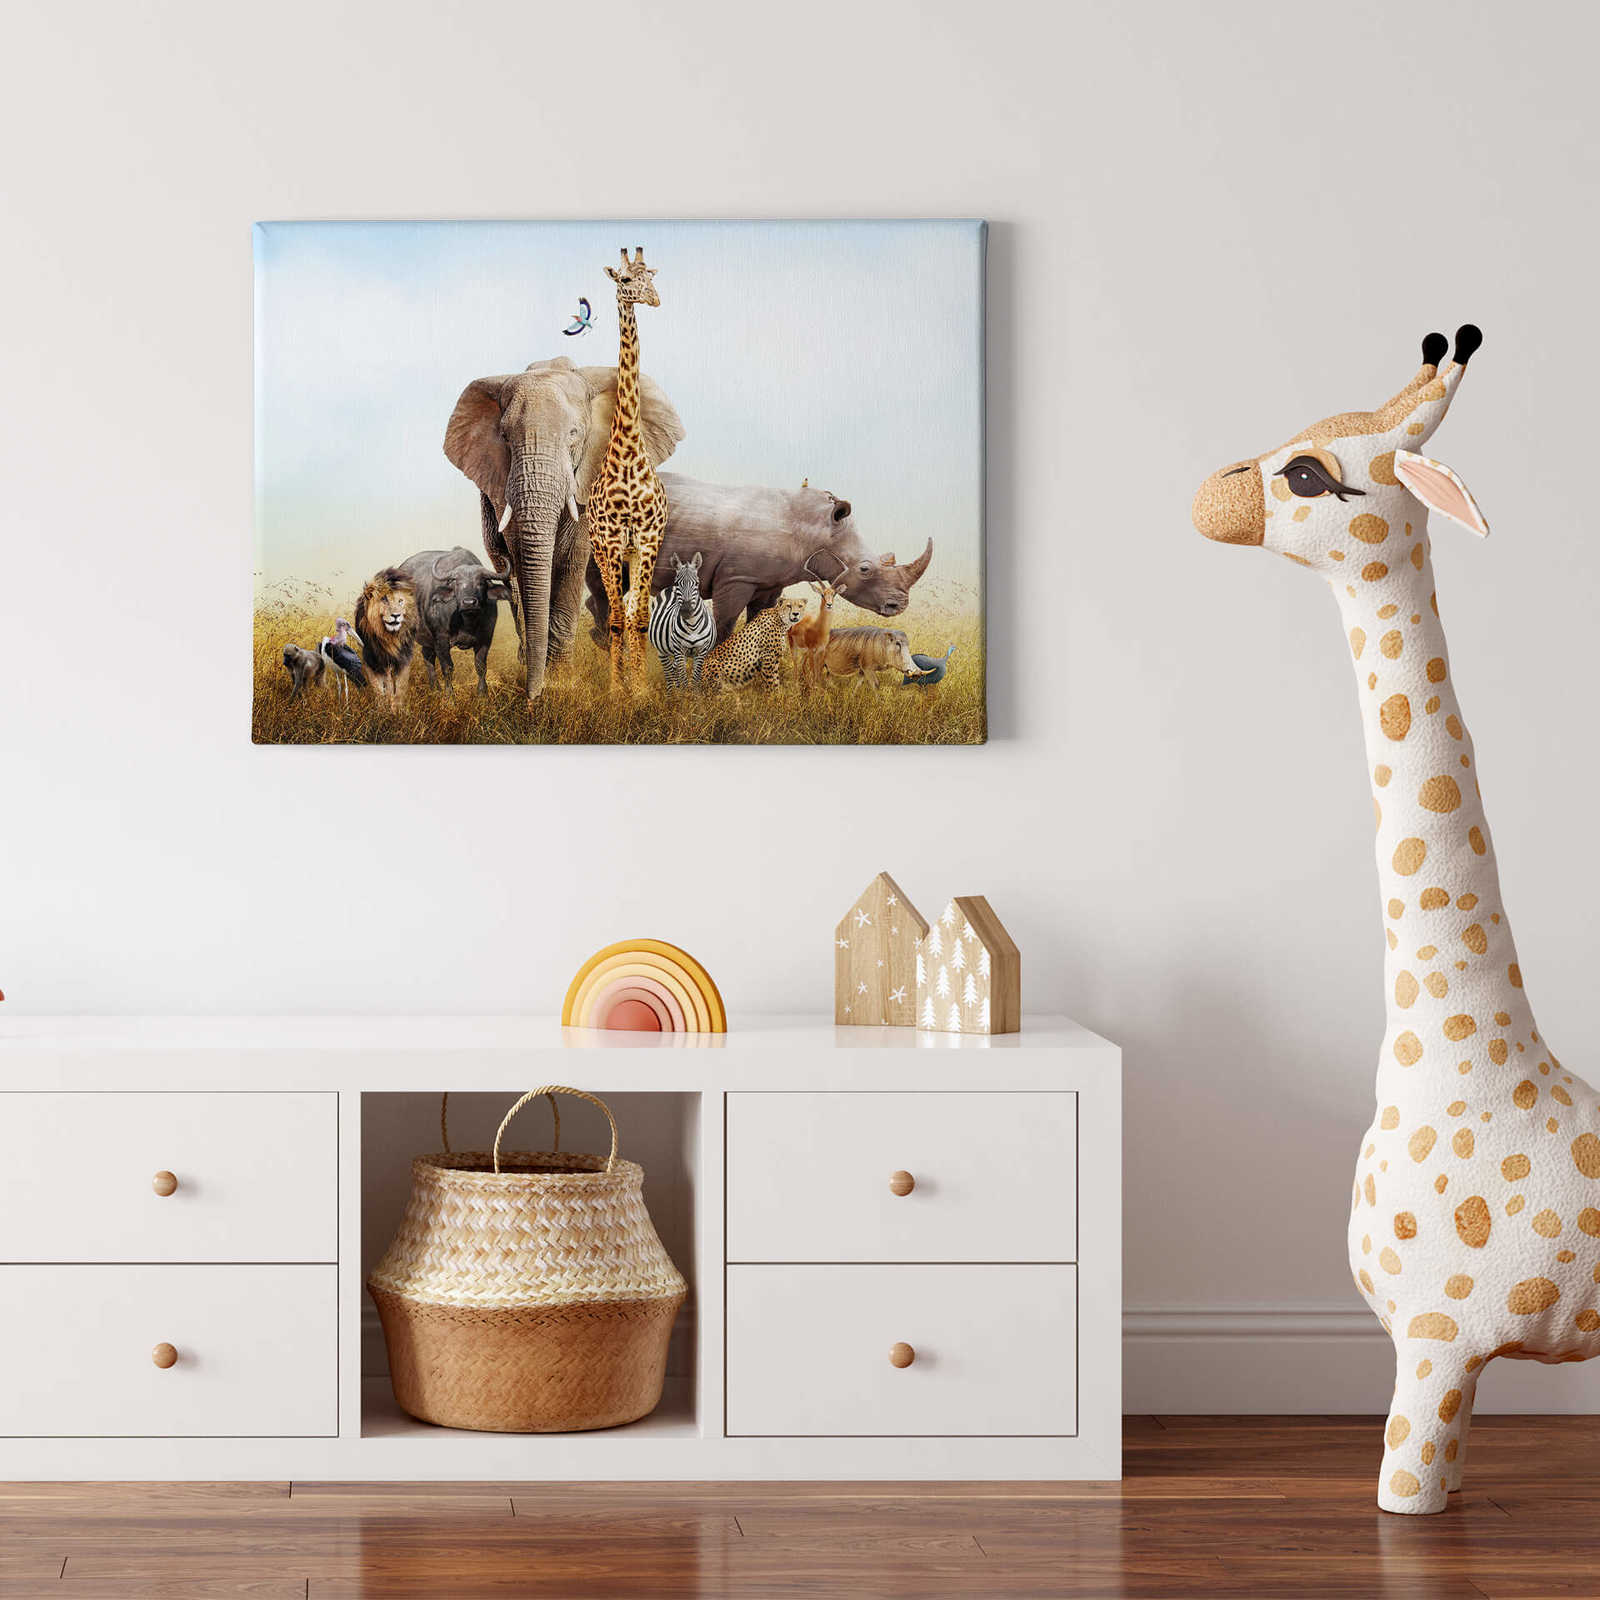             Canvas print African animals in nature
        